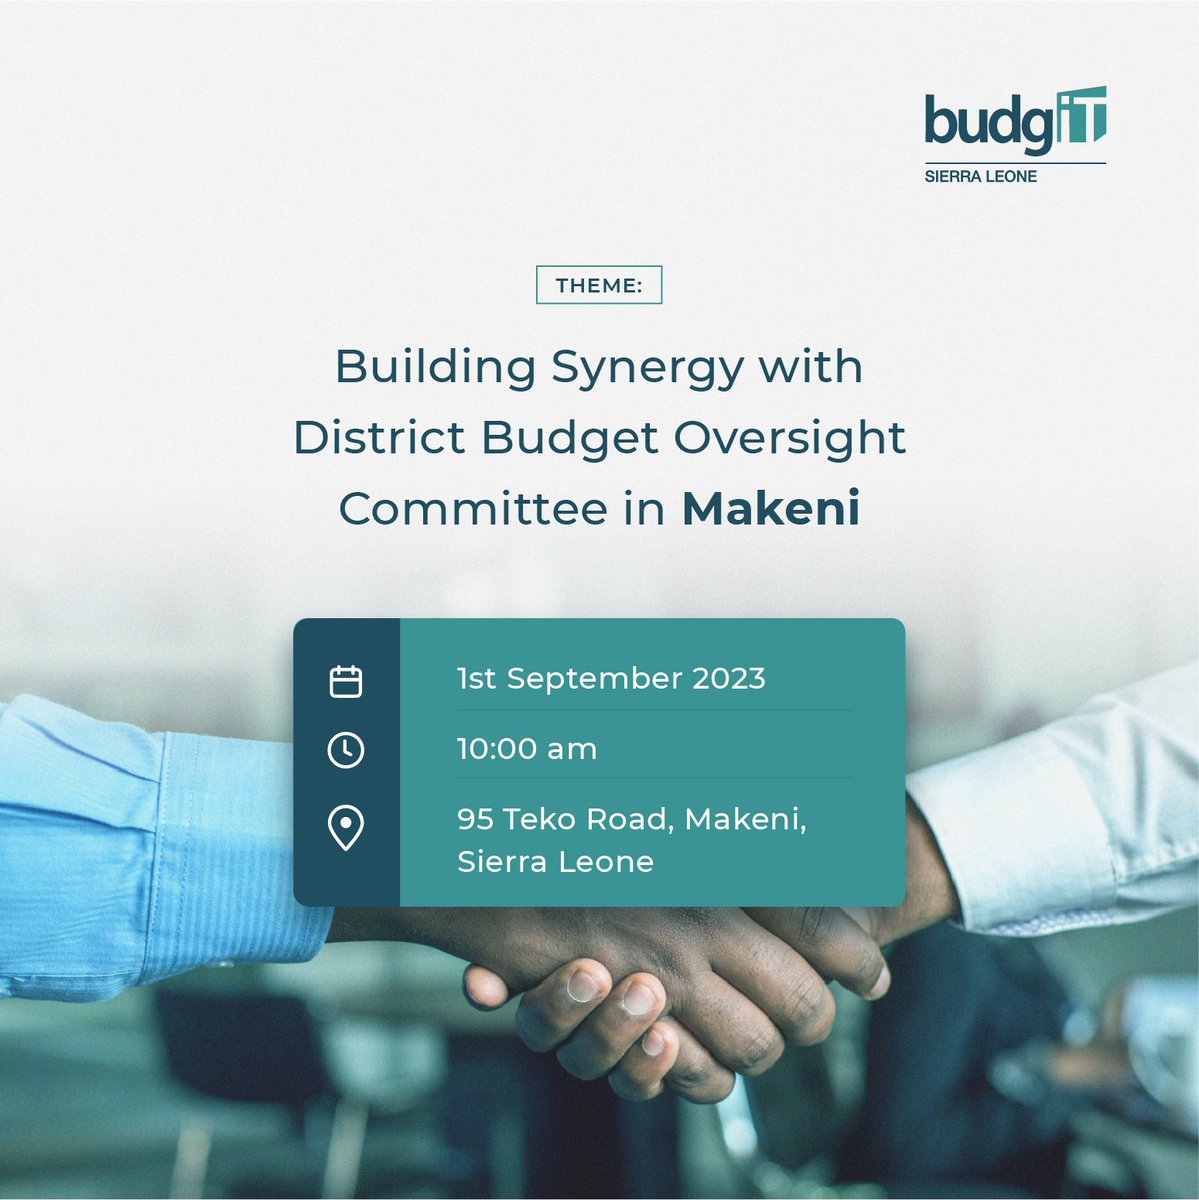 We will be meeting The District Budget Oversight Committees in Makeni to build synergy. One of the key institutions with a mandate to promote citizens' participation in #governance and #accountability processes essentially by ensuring inclusivity in budgetary processes.